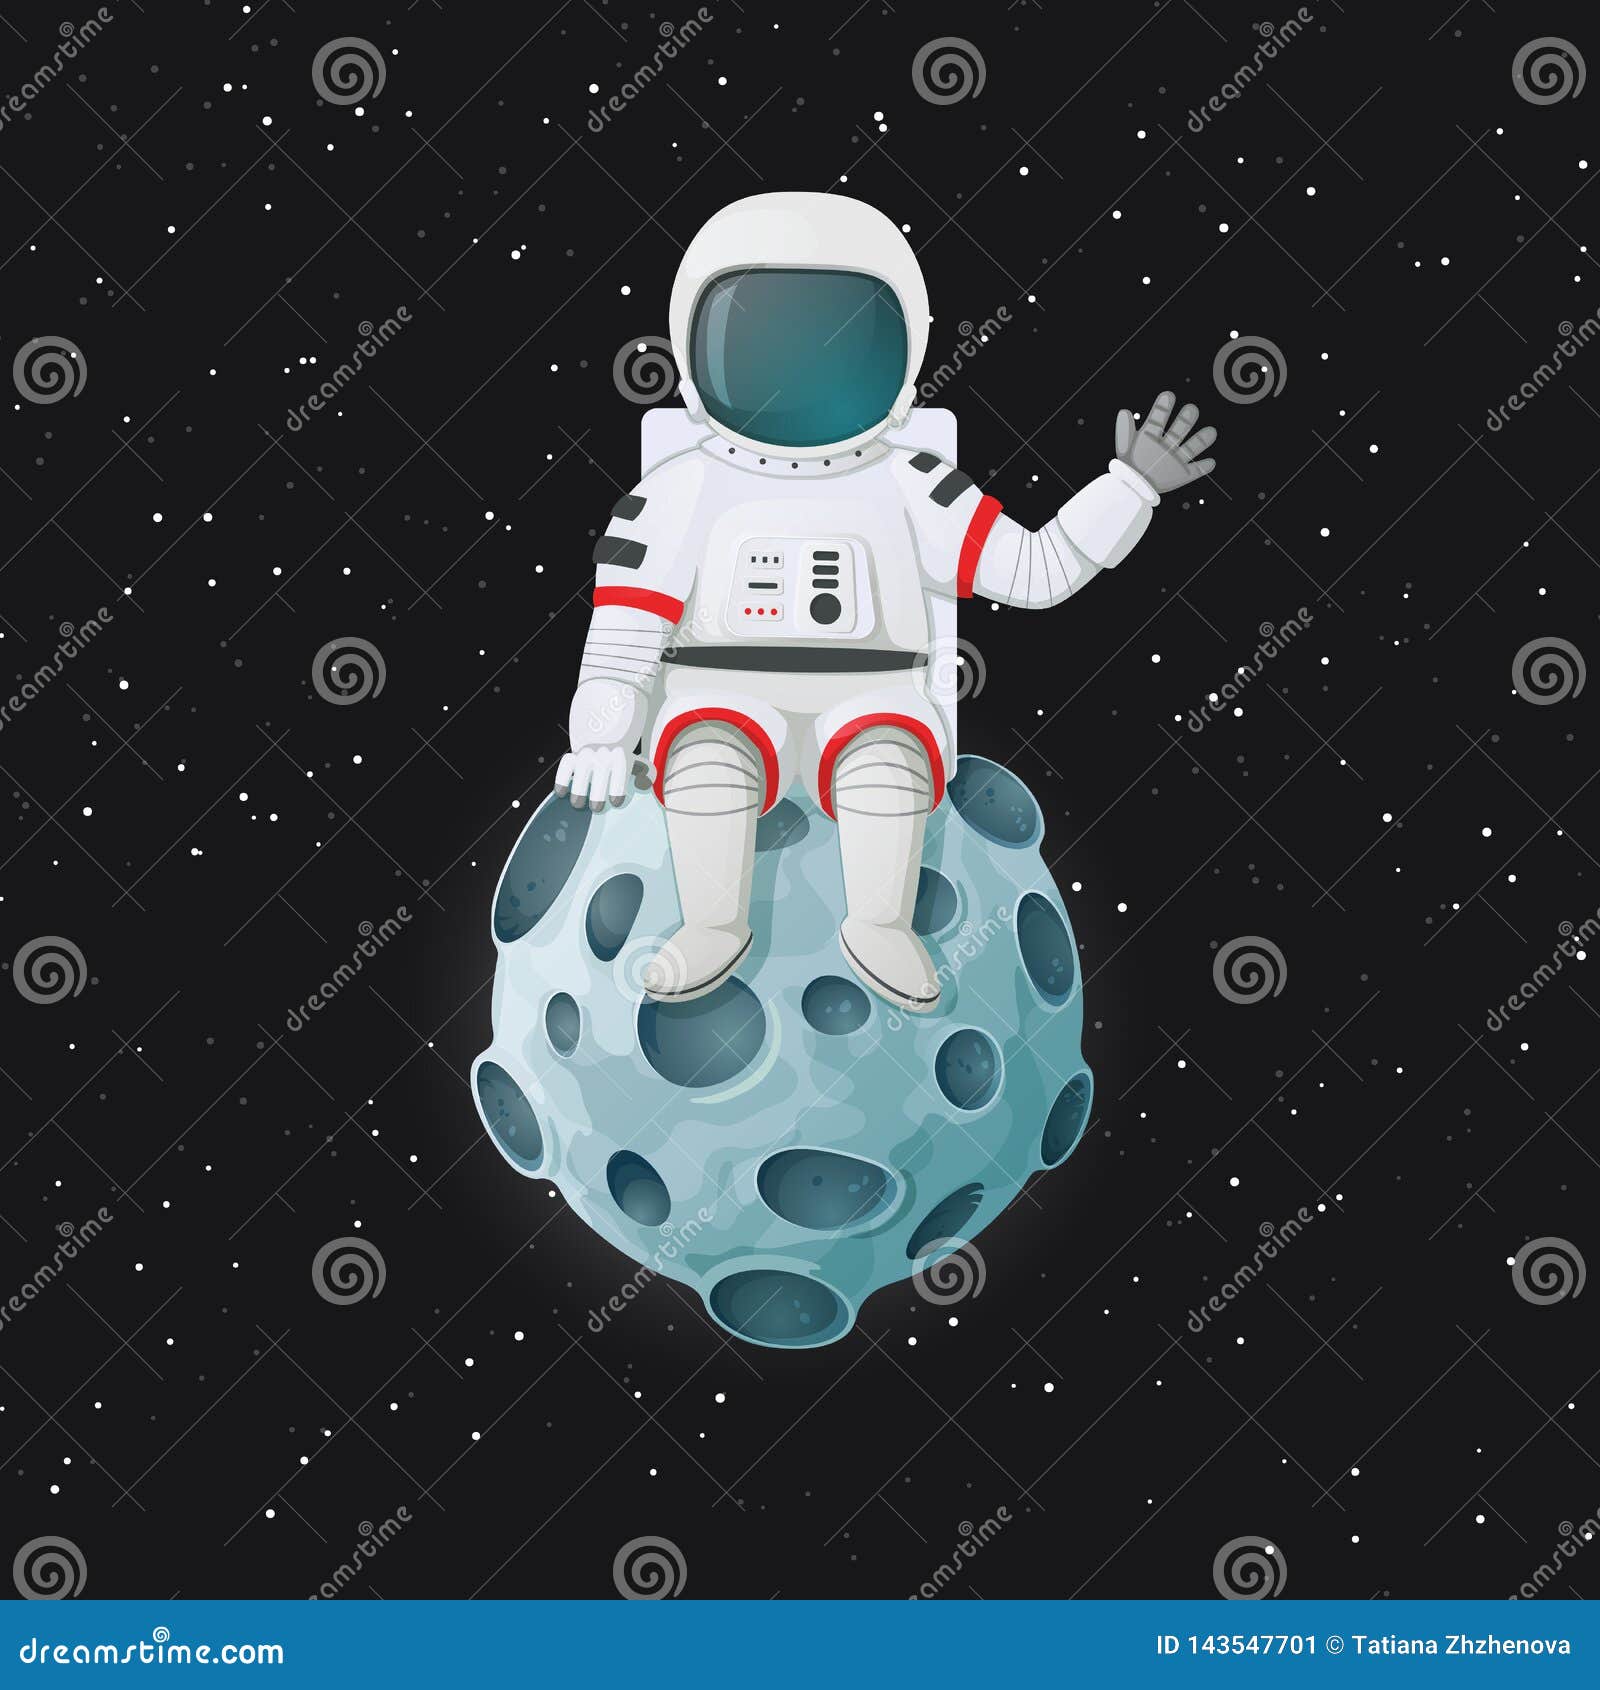 Cartoon Astronaut Sitting on the Moon Waving. Outer Space and Stars in the  Background. Stock Vector - Illustration of future, earth: 143547701